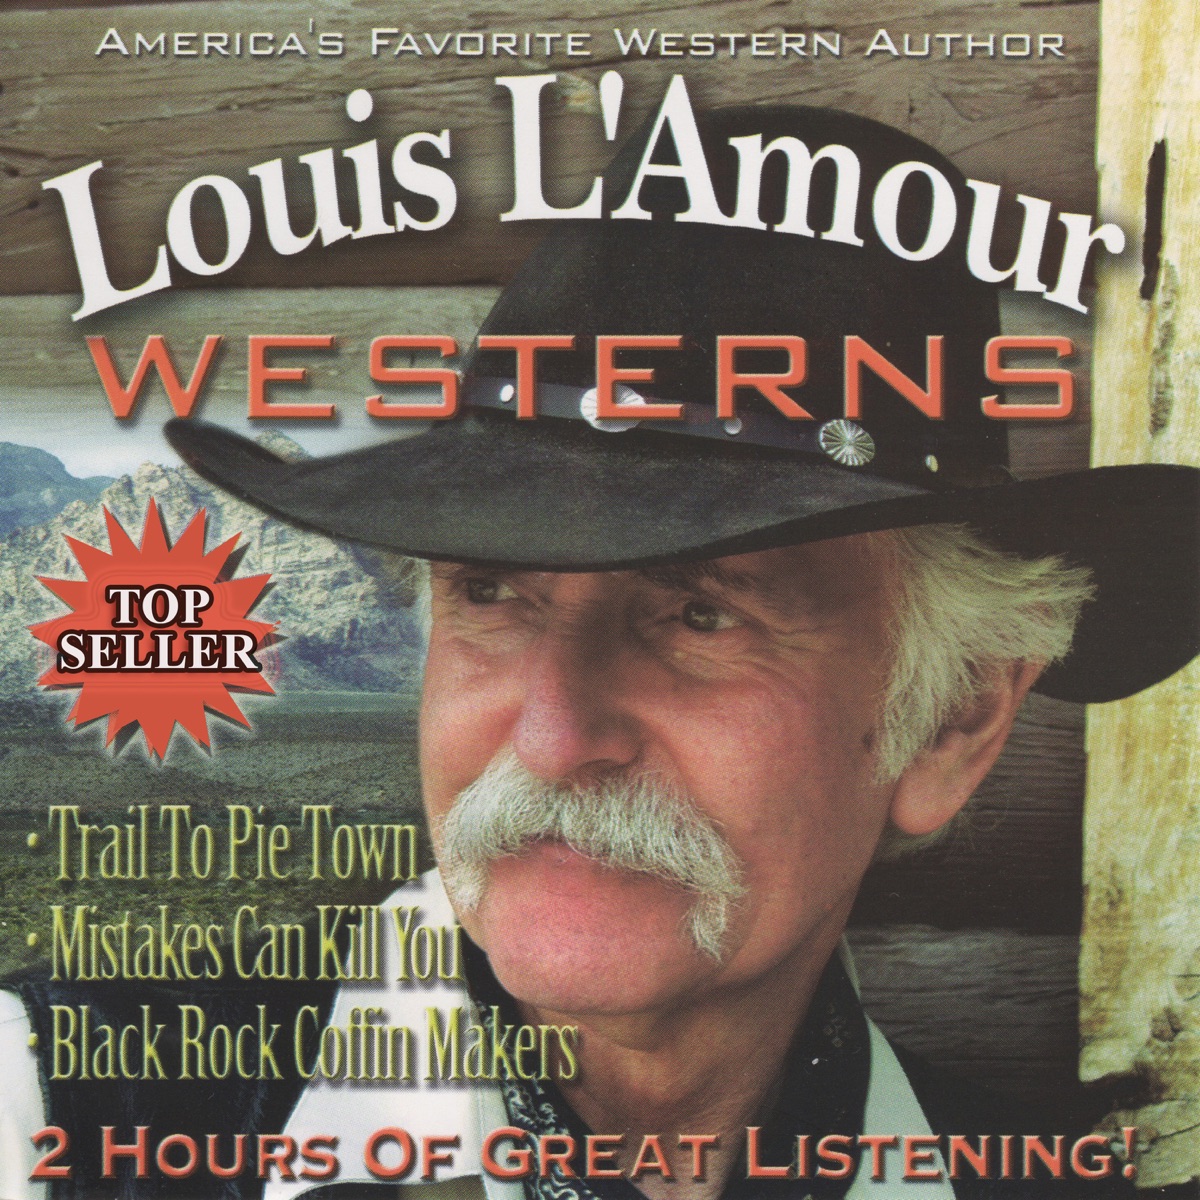 Louis L'Amour Westerns: Riding for the Brand, Vol. 1 - Album by Louis L' Amour - Apple Music